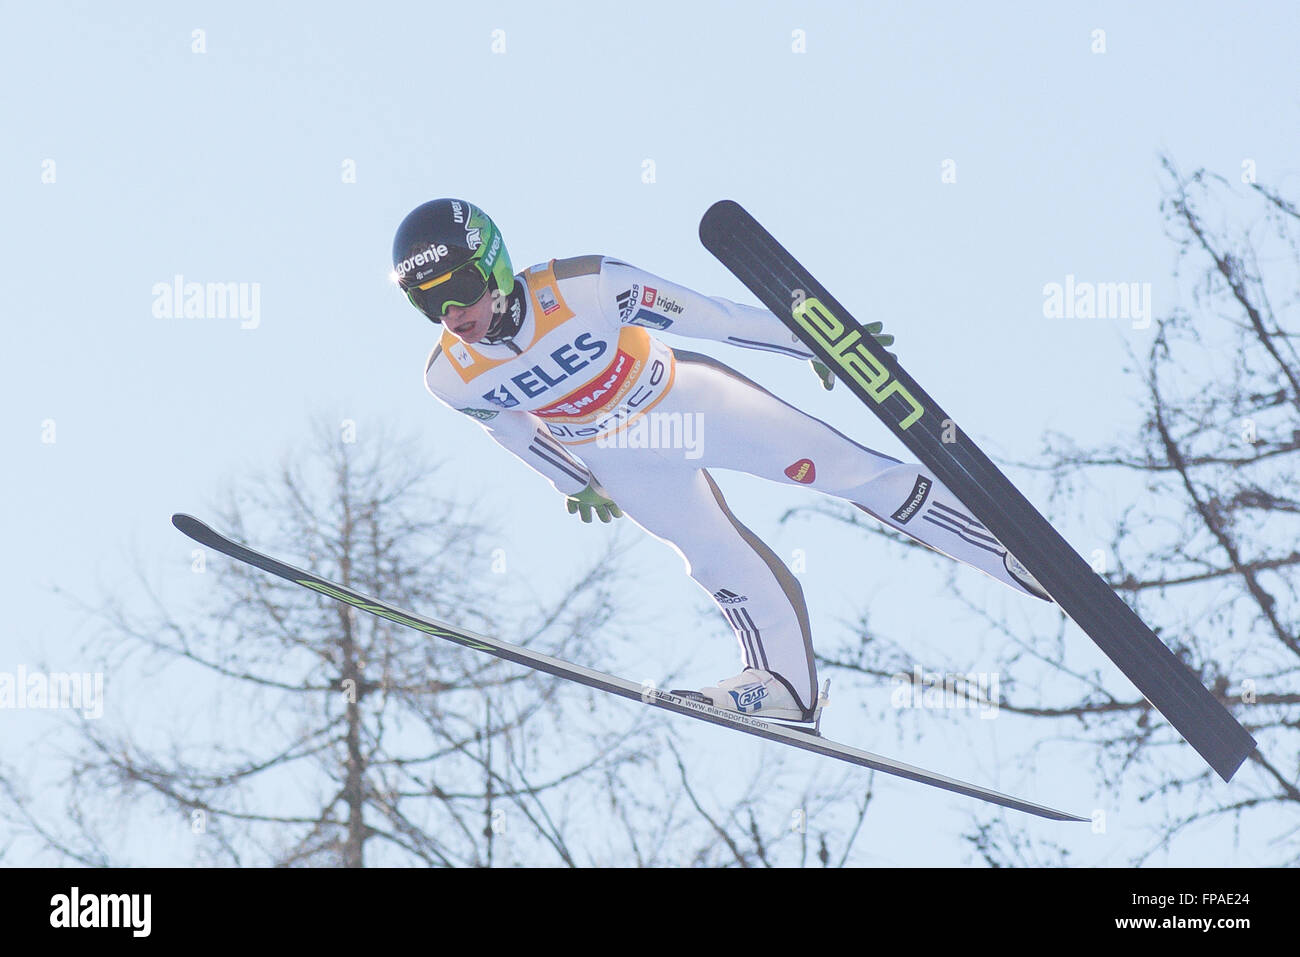 Planica, Slovenia. 18th Mar, 2016. Peter Prevc of Slovenia competes during Planica FIS Ski Jumping World Cup finals on the March 18, 2016 in Planica, Slovenia. © Rok Rakun/Pacific Press/Alamy Live News Stock Photo